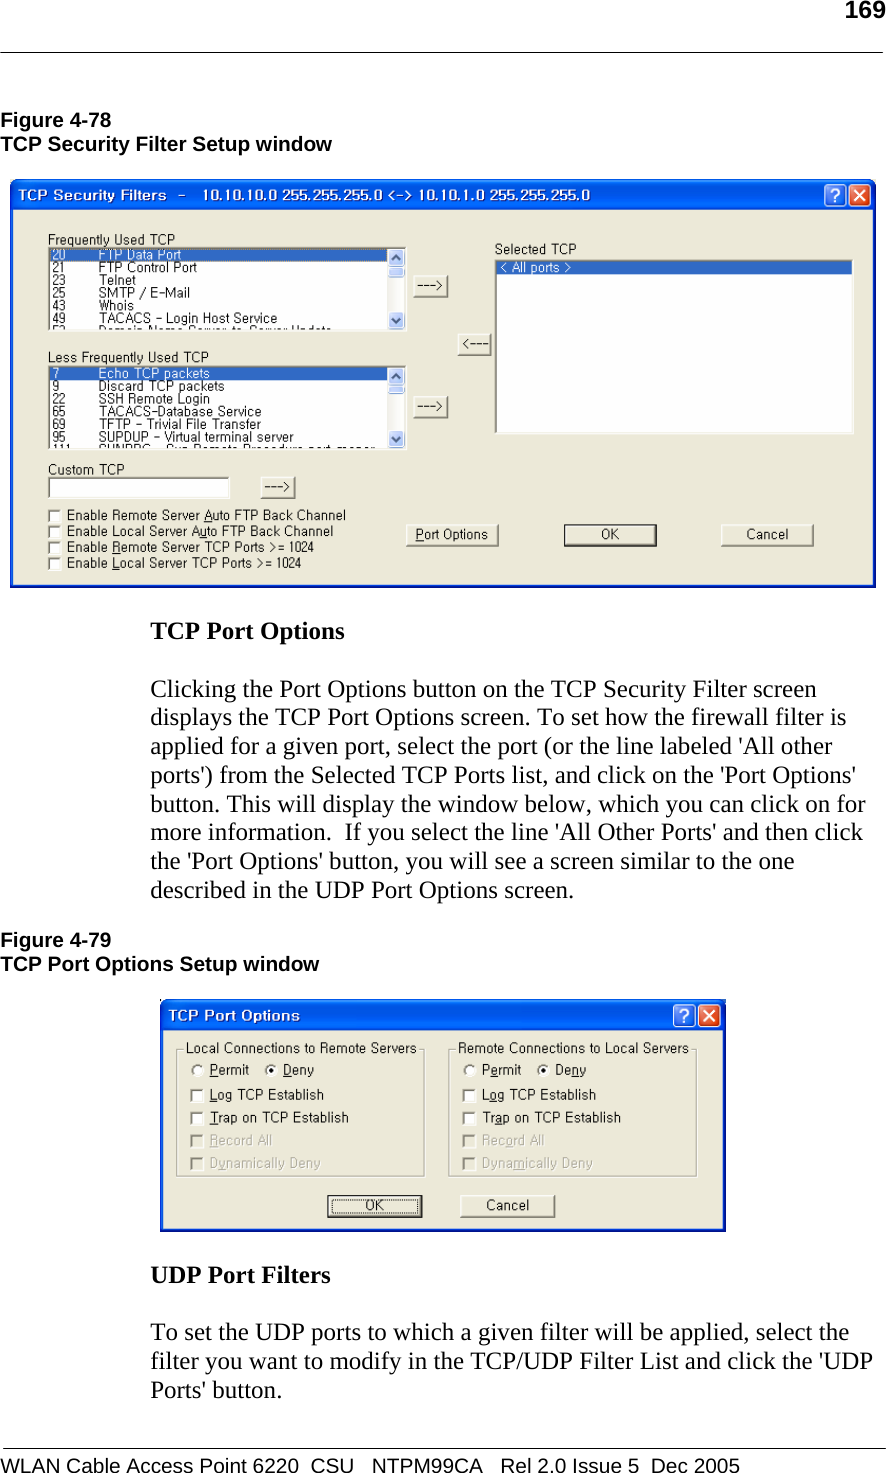   169  WLAN Cable Access Point 6220  CSU   NTPM99CA   Rel 2.0 Issue 5  Dec 2005 Figure 4-78 TCP Security Filter Setup window    TCP Port Options   Clicking the Port Options button on the TCP Security Filter screen displays the TCP Port Options screen. To set how the firewall filter is applied for a given port, select the port (or the line labeled &apos;All other ports&apos;) from the Selected TCP Ports list, and click on the &apos;Port Options&apos; button. This will display the window below, which you can click on for more information.  If you select the line &apos;All Other Ports&apos; and then click the &apos;Port Options&apos; button, you will see a screen similar to the one described in the UDP Port Options screen.  Figure 4-79 TCP Port Options Setup window    UDP Port Filters   To set the UDP ports to which a given filter will be applied, select the filter you want to modify in the TCP/UDP Filter List and click the &apos;UDP Ports&apos; button.   